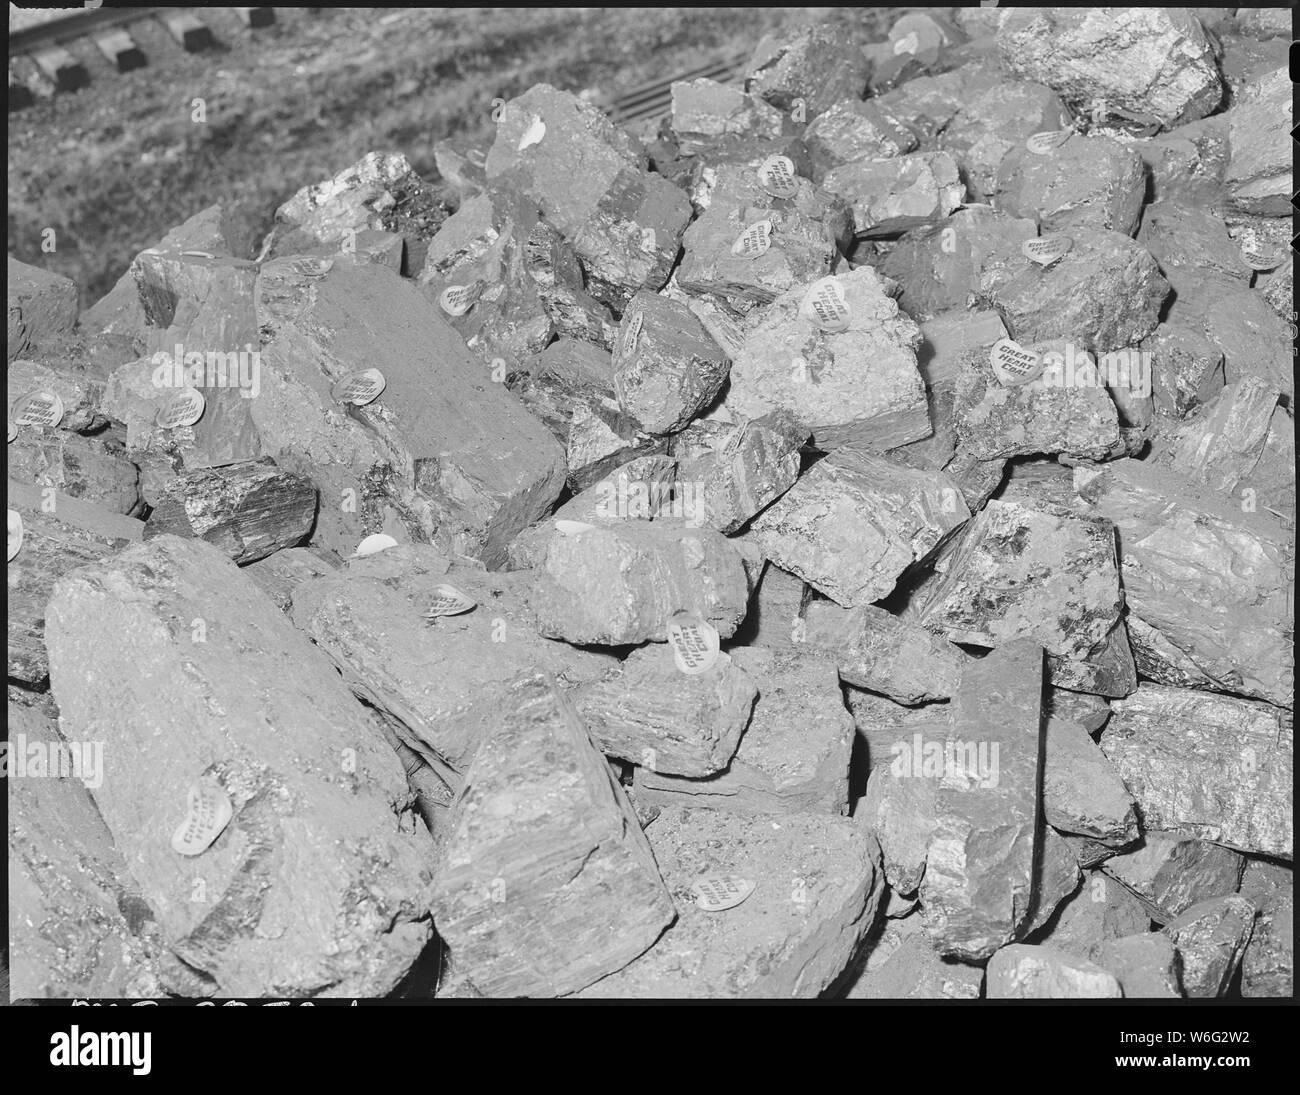 Coal produced by these two mines is labeled. Black Mountain Corporation, 30-31 Mines, Kenvir, Harlan County, Kentucky. Stock Photo